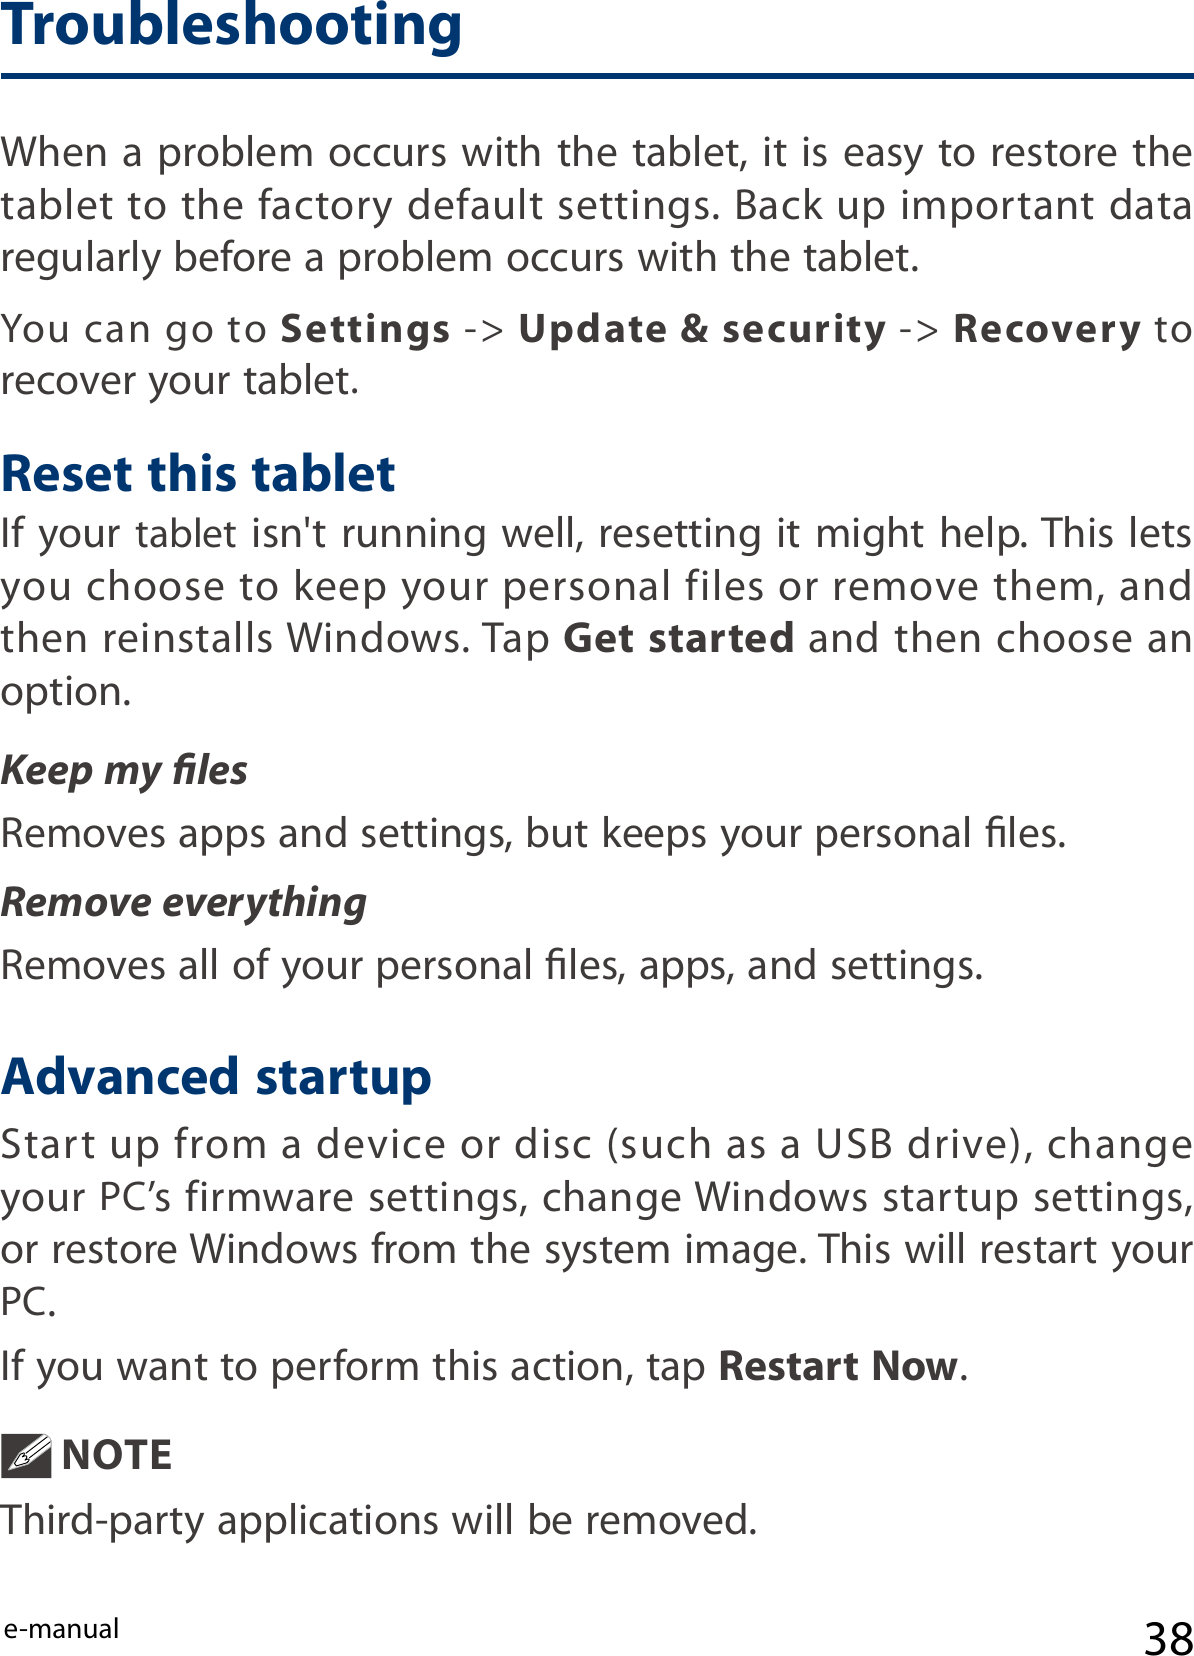 e-manualIf your tablet isn&apos;t running well, resetting it might help. This lets you choose to keep your personal files or remove them, and then reinstalls Windows. Tap Get started and then choose an option. Keep my lesRemoves apps and settings, but keeps your personal les.Remove everythingRemoves all of your personal les, apps, and settings.Start up from a device or disc (such as a USB drive), change your PC’s firmware settings, change Windows startup settings, or restore Windows from the system image. This will restart your PC. If you want to perform this action, tap Restart Now. NOTE Third-party applications will be removed.You  can go  to Settings -&gt; Update &amp; security -&gt; Recovery to recover your tablet.When a problem occurs with the tablet, it is easy to restore the tablet to the factory default settings. Back up important data regularly before a problem occurs with the tablet.Reset this tabletAdvanced startupTroubleshooting38